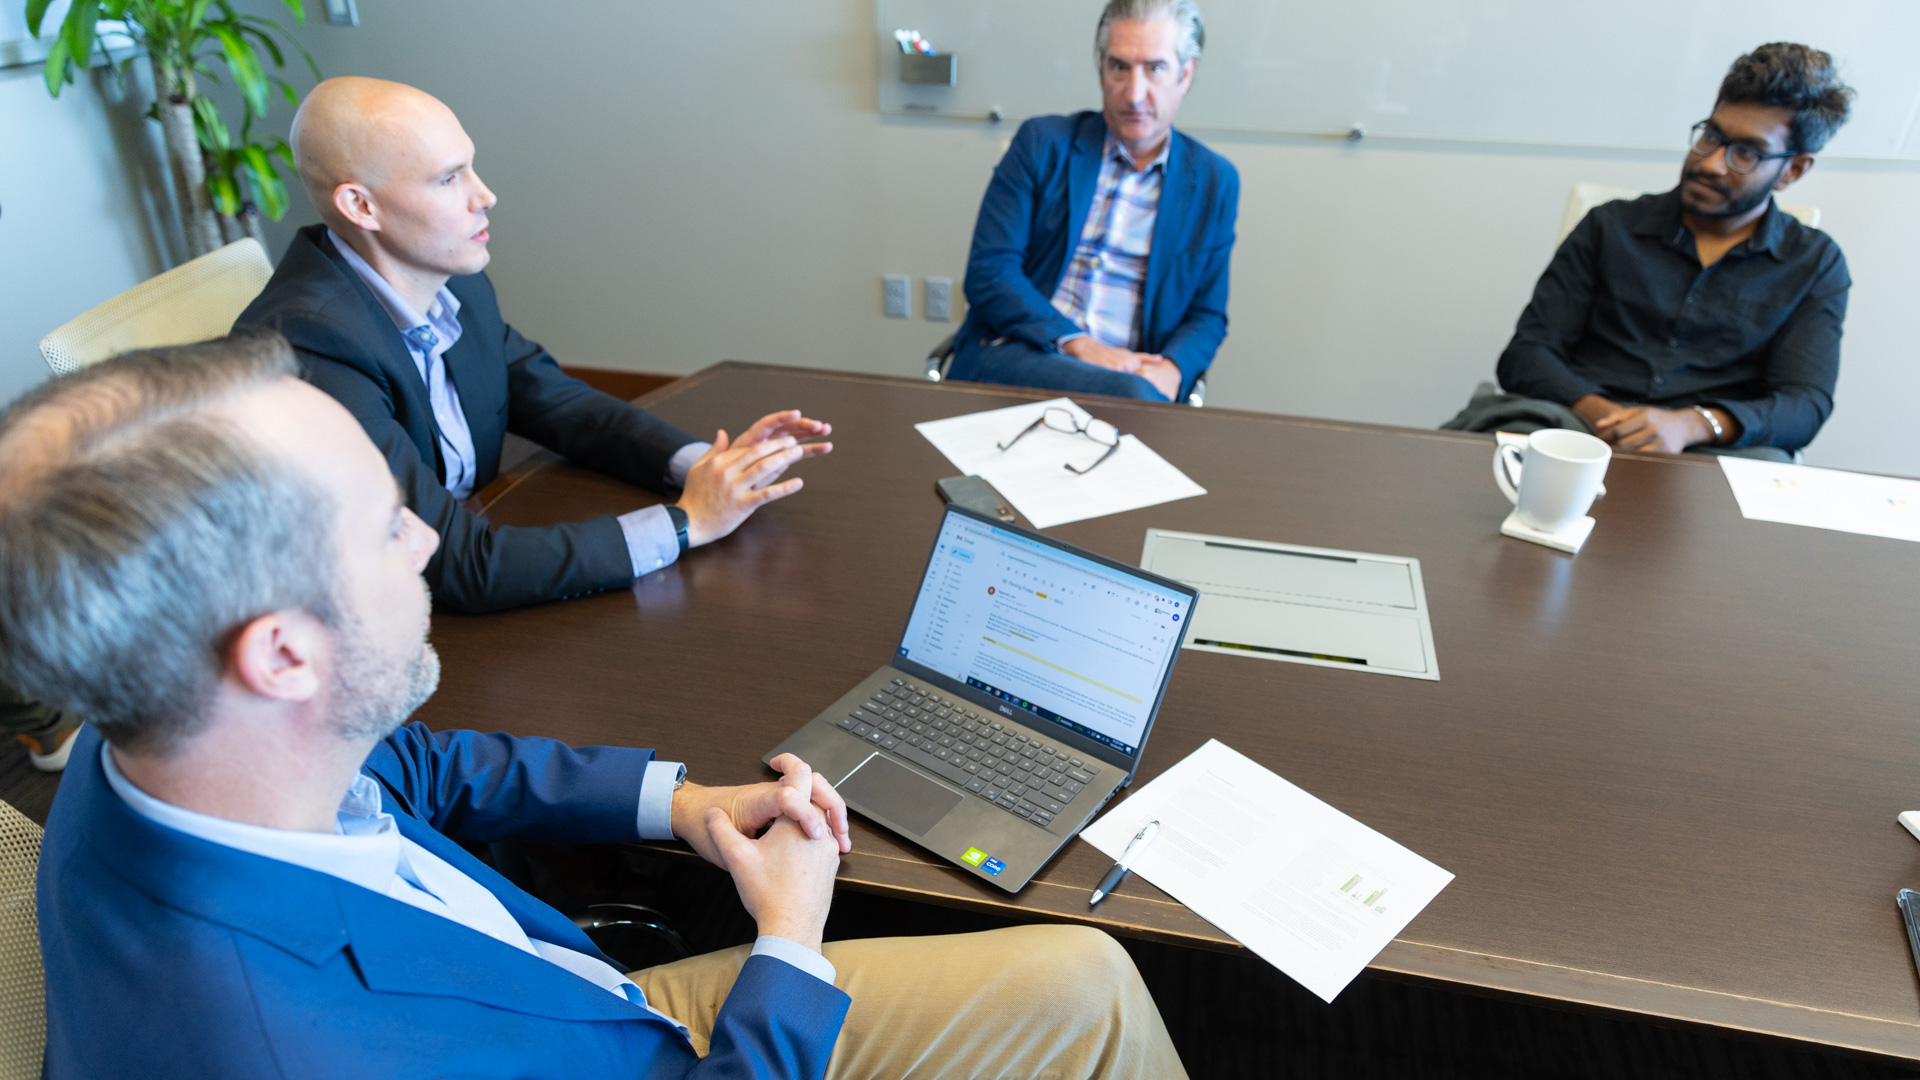 A group of professionals converse at a meeting table at the KU Innovation Park in Lawrence.